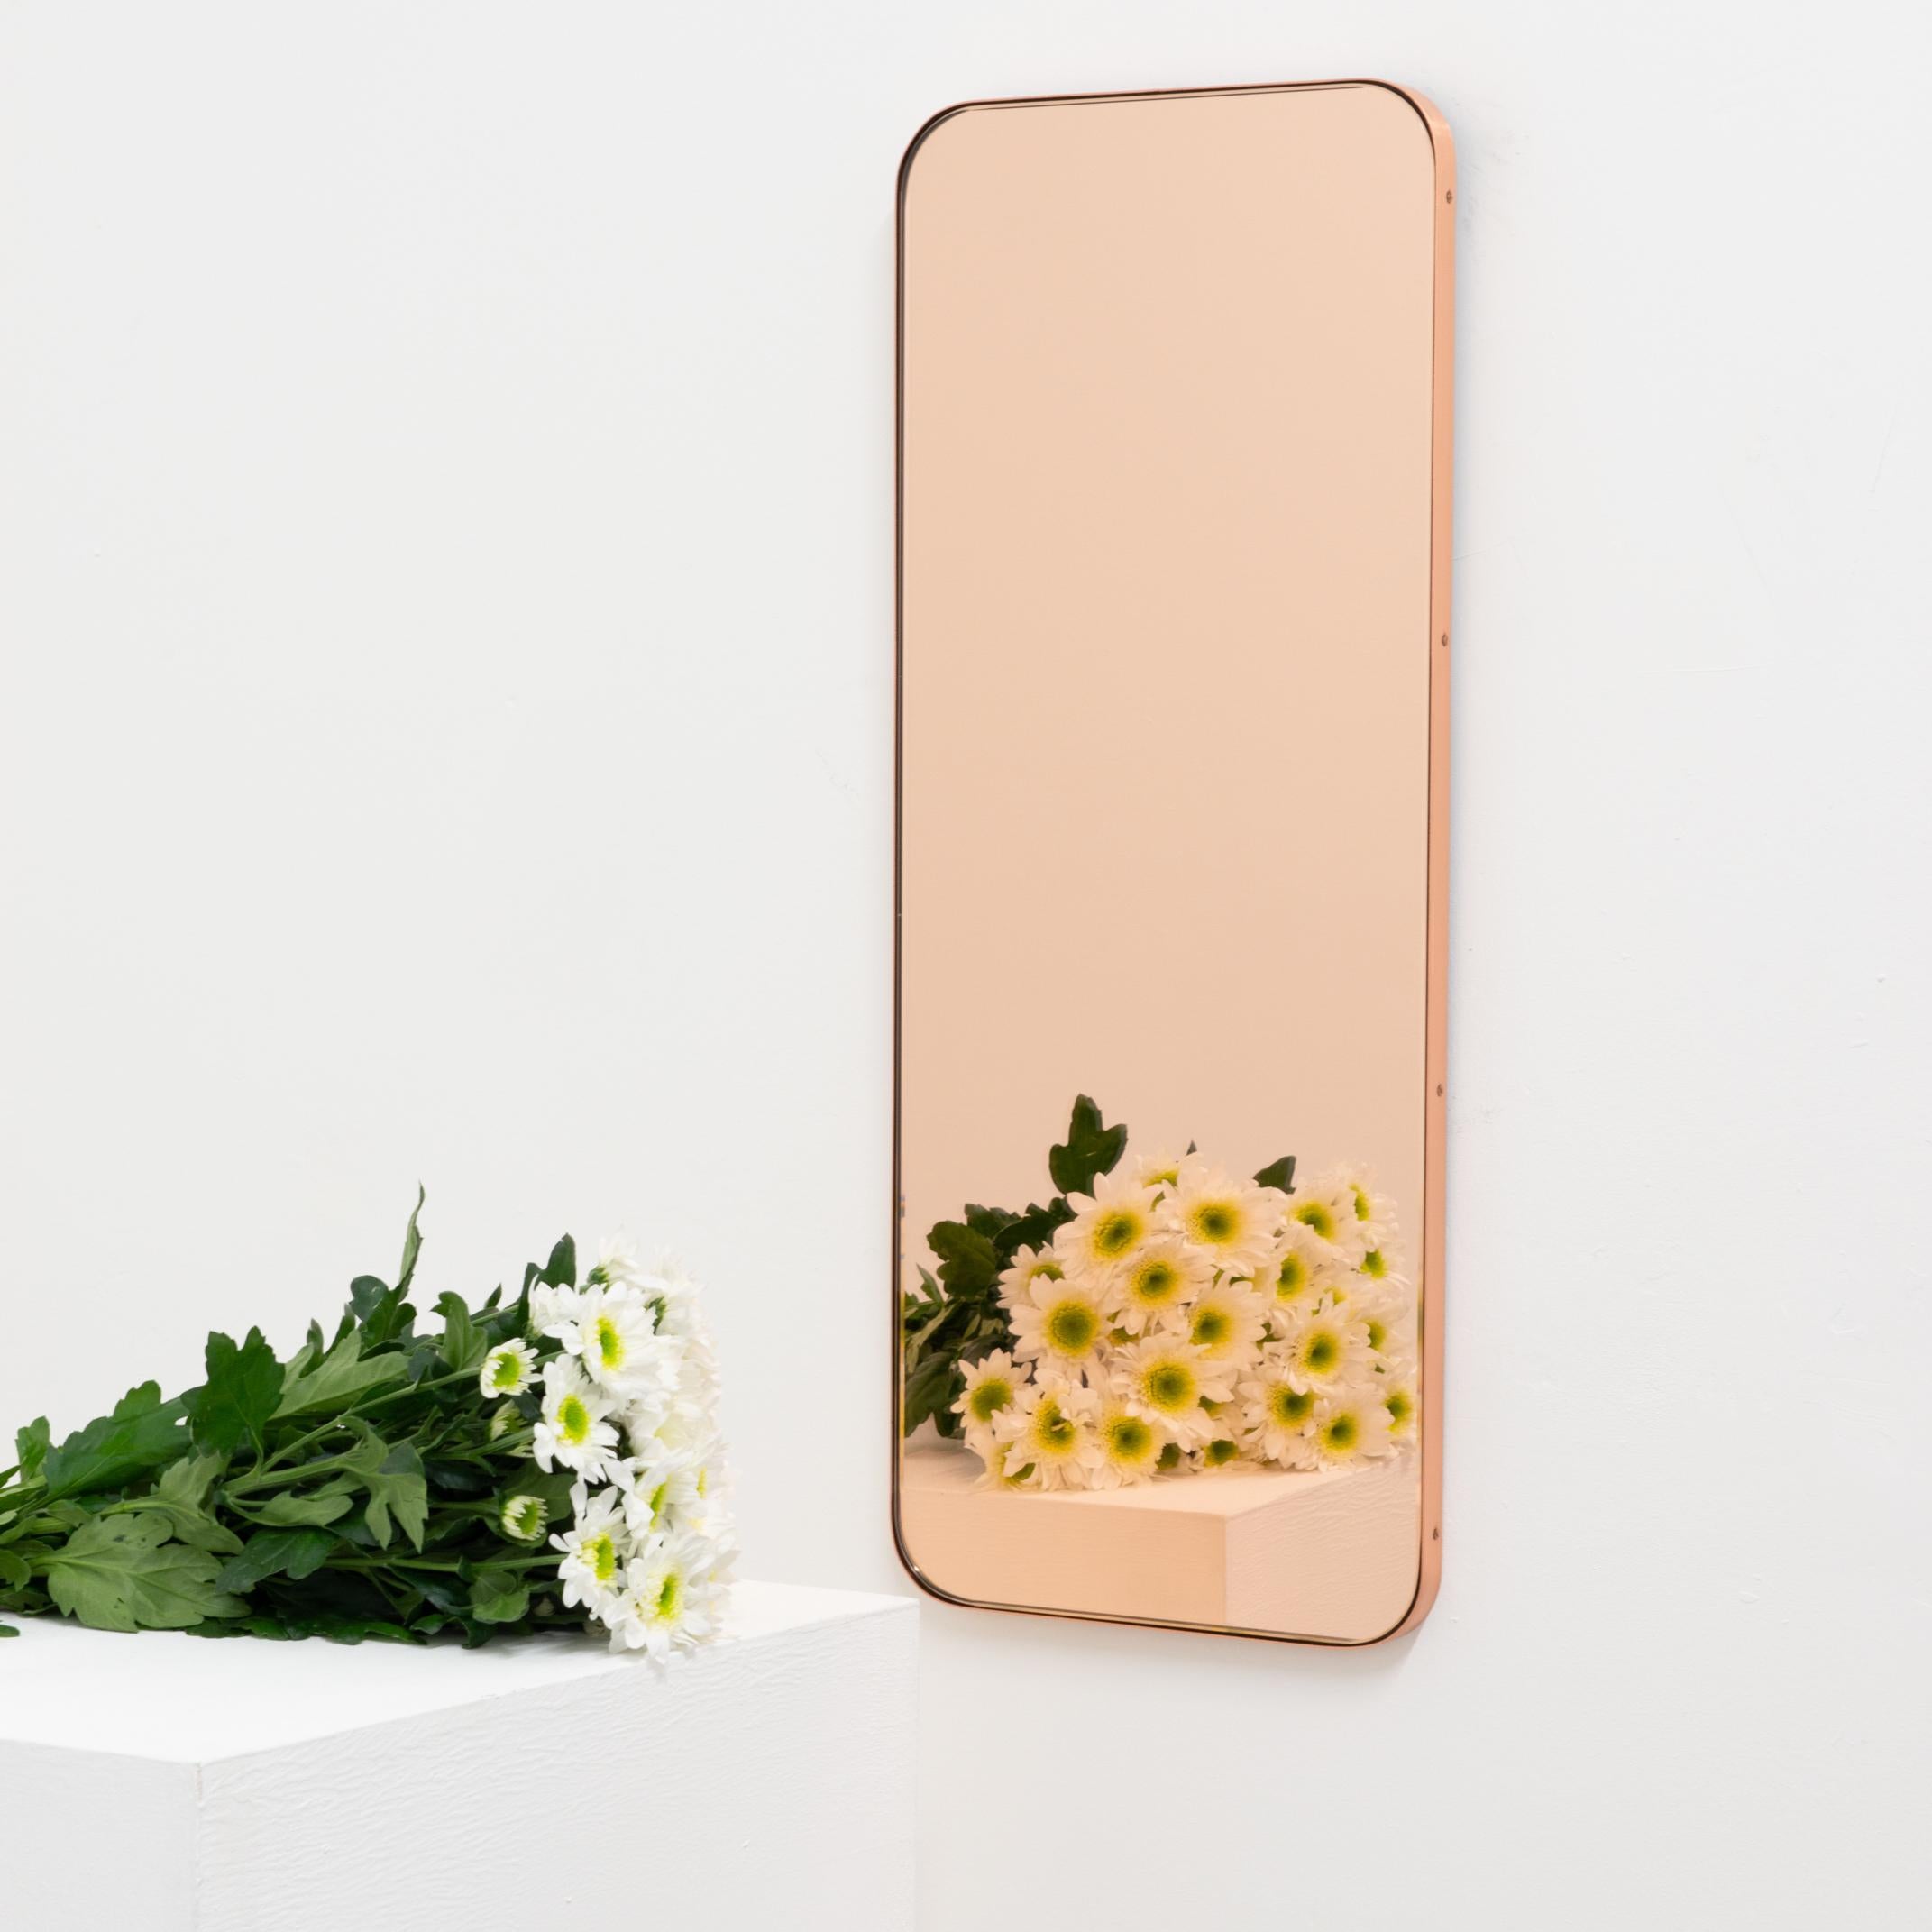 Quadris Rectangular Rose Gold Contemporary Mirror with a Copper Frame, Large For Sale 2